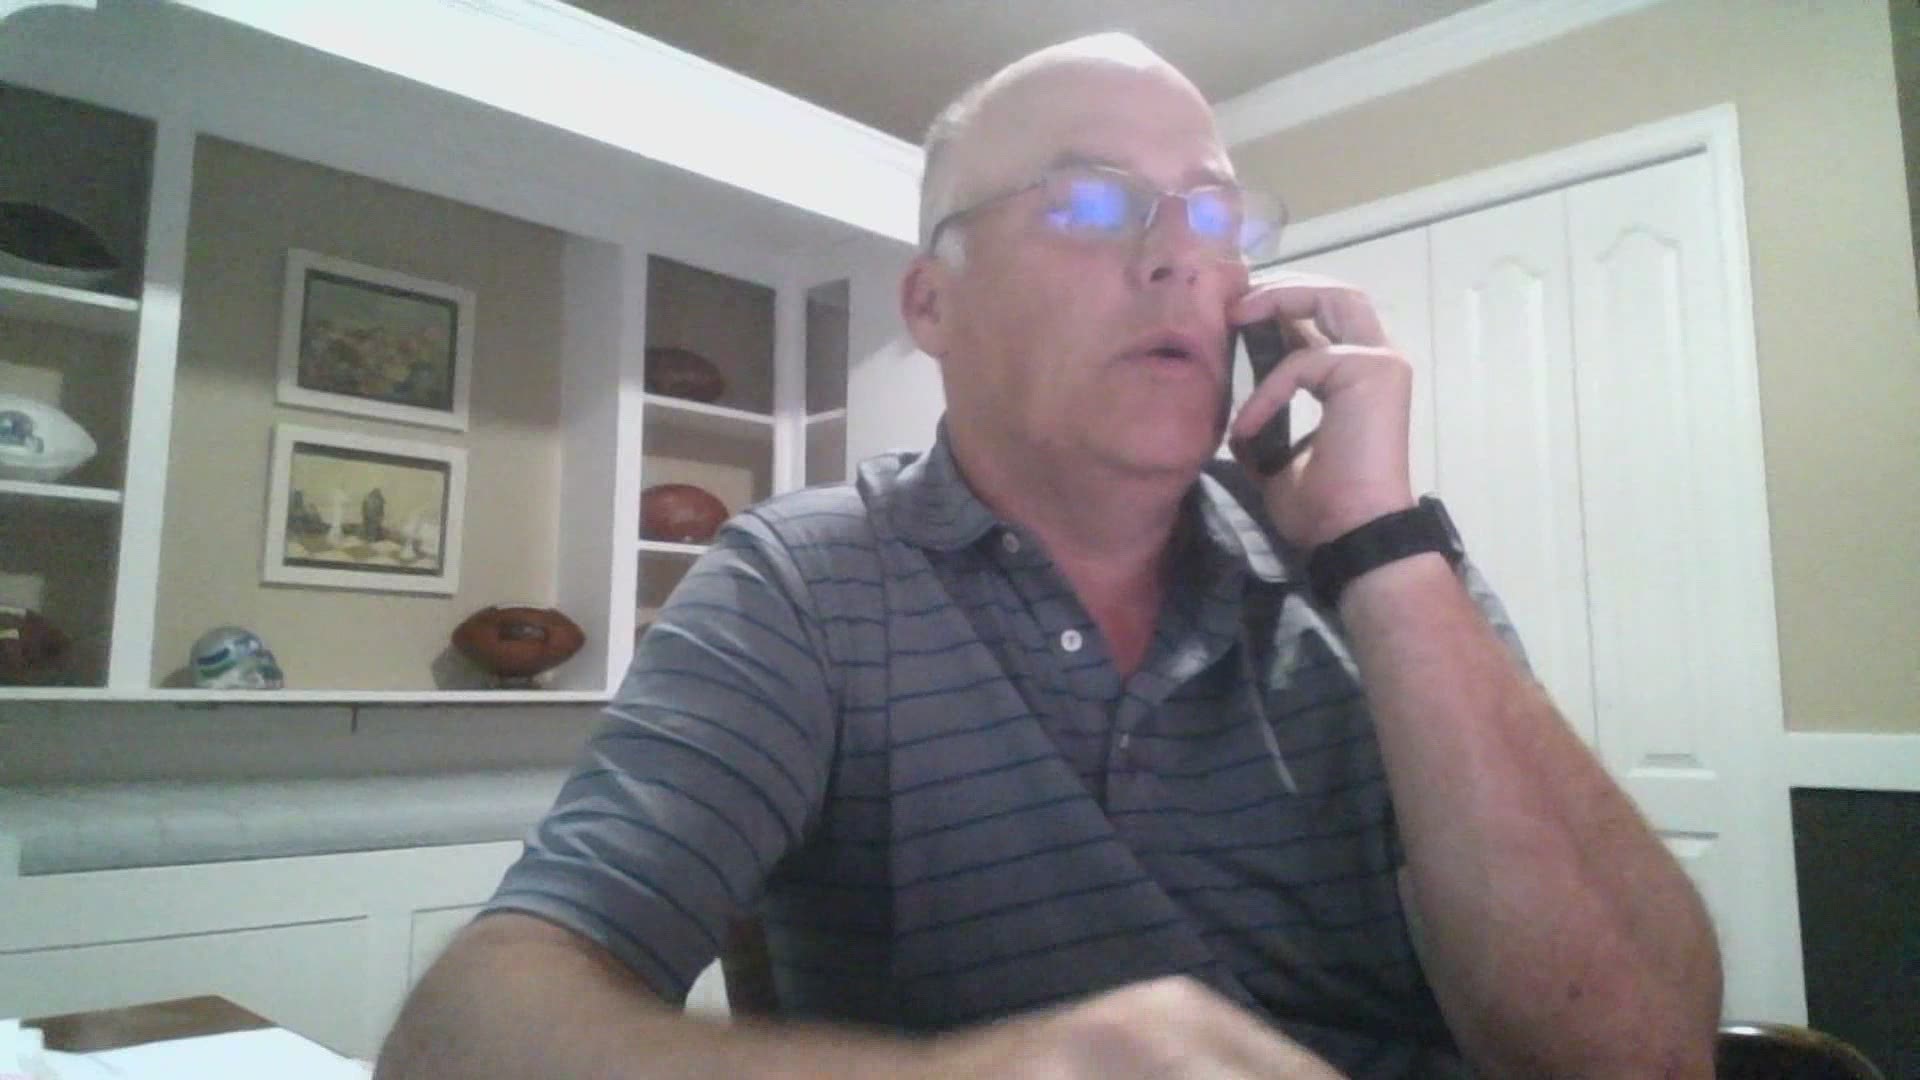 Steve Baus struck back at telemarketers who jammed his cell phone by making them pay – literally.